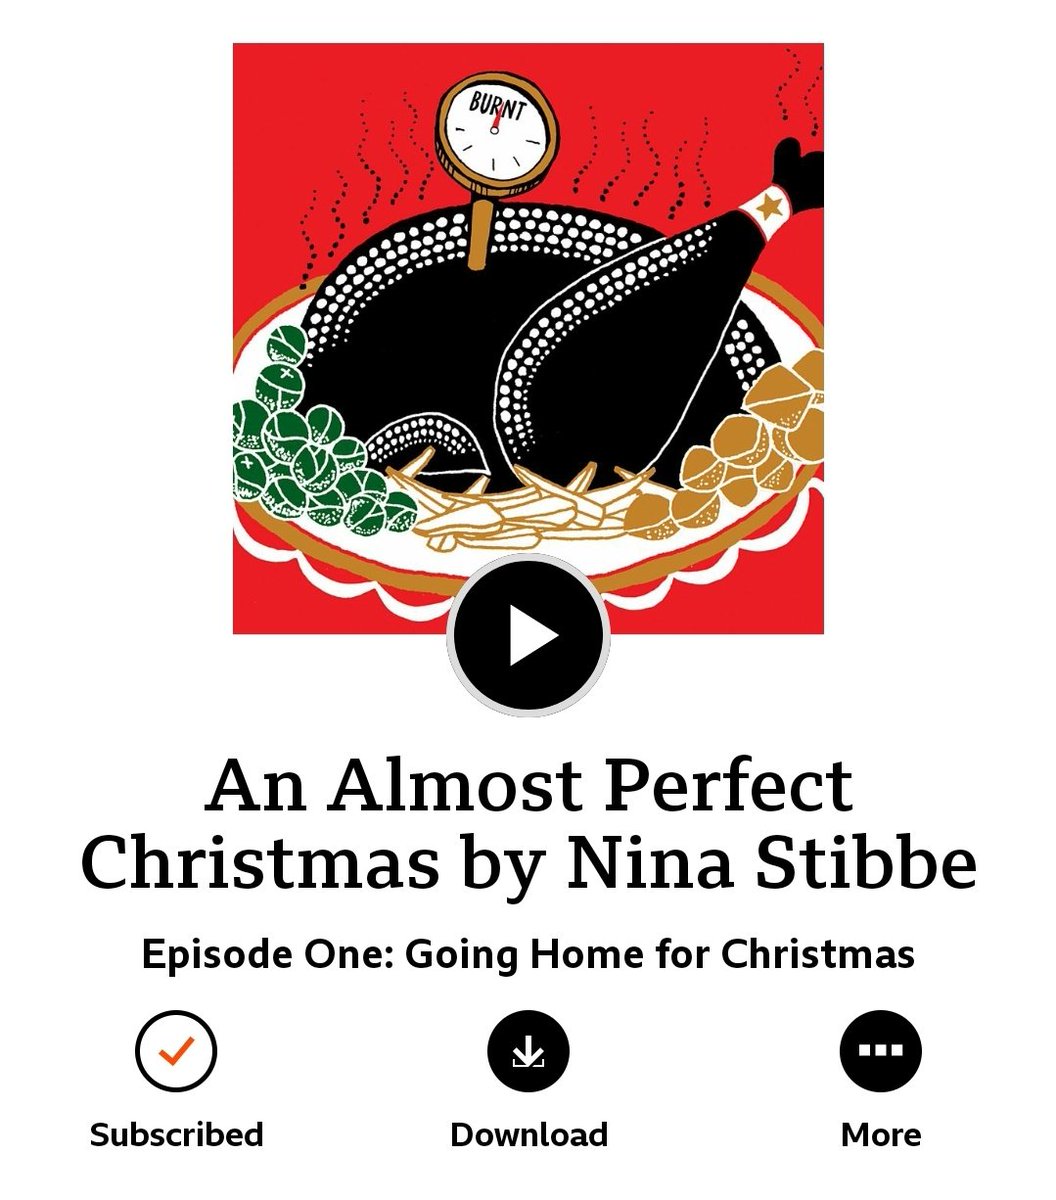 I'm listening to  @ninastibbe's An Almost Perfect Christmas on BBC Sounds. And the 'Who Shat on the Floor at my Wedding?' podcast which is, as you can imagine, pure joy.